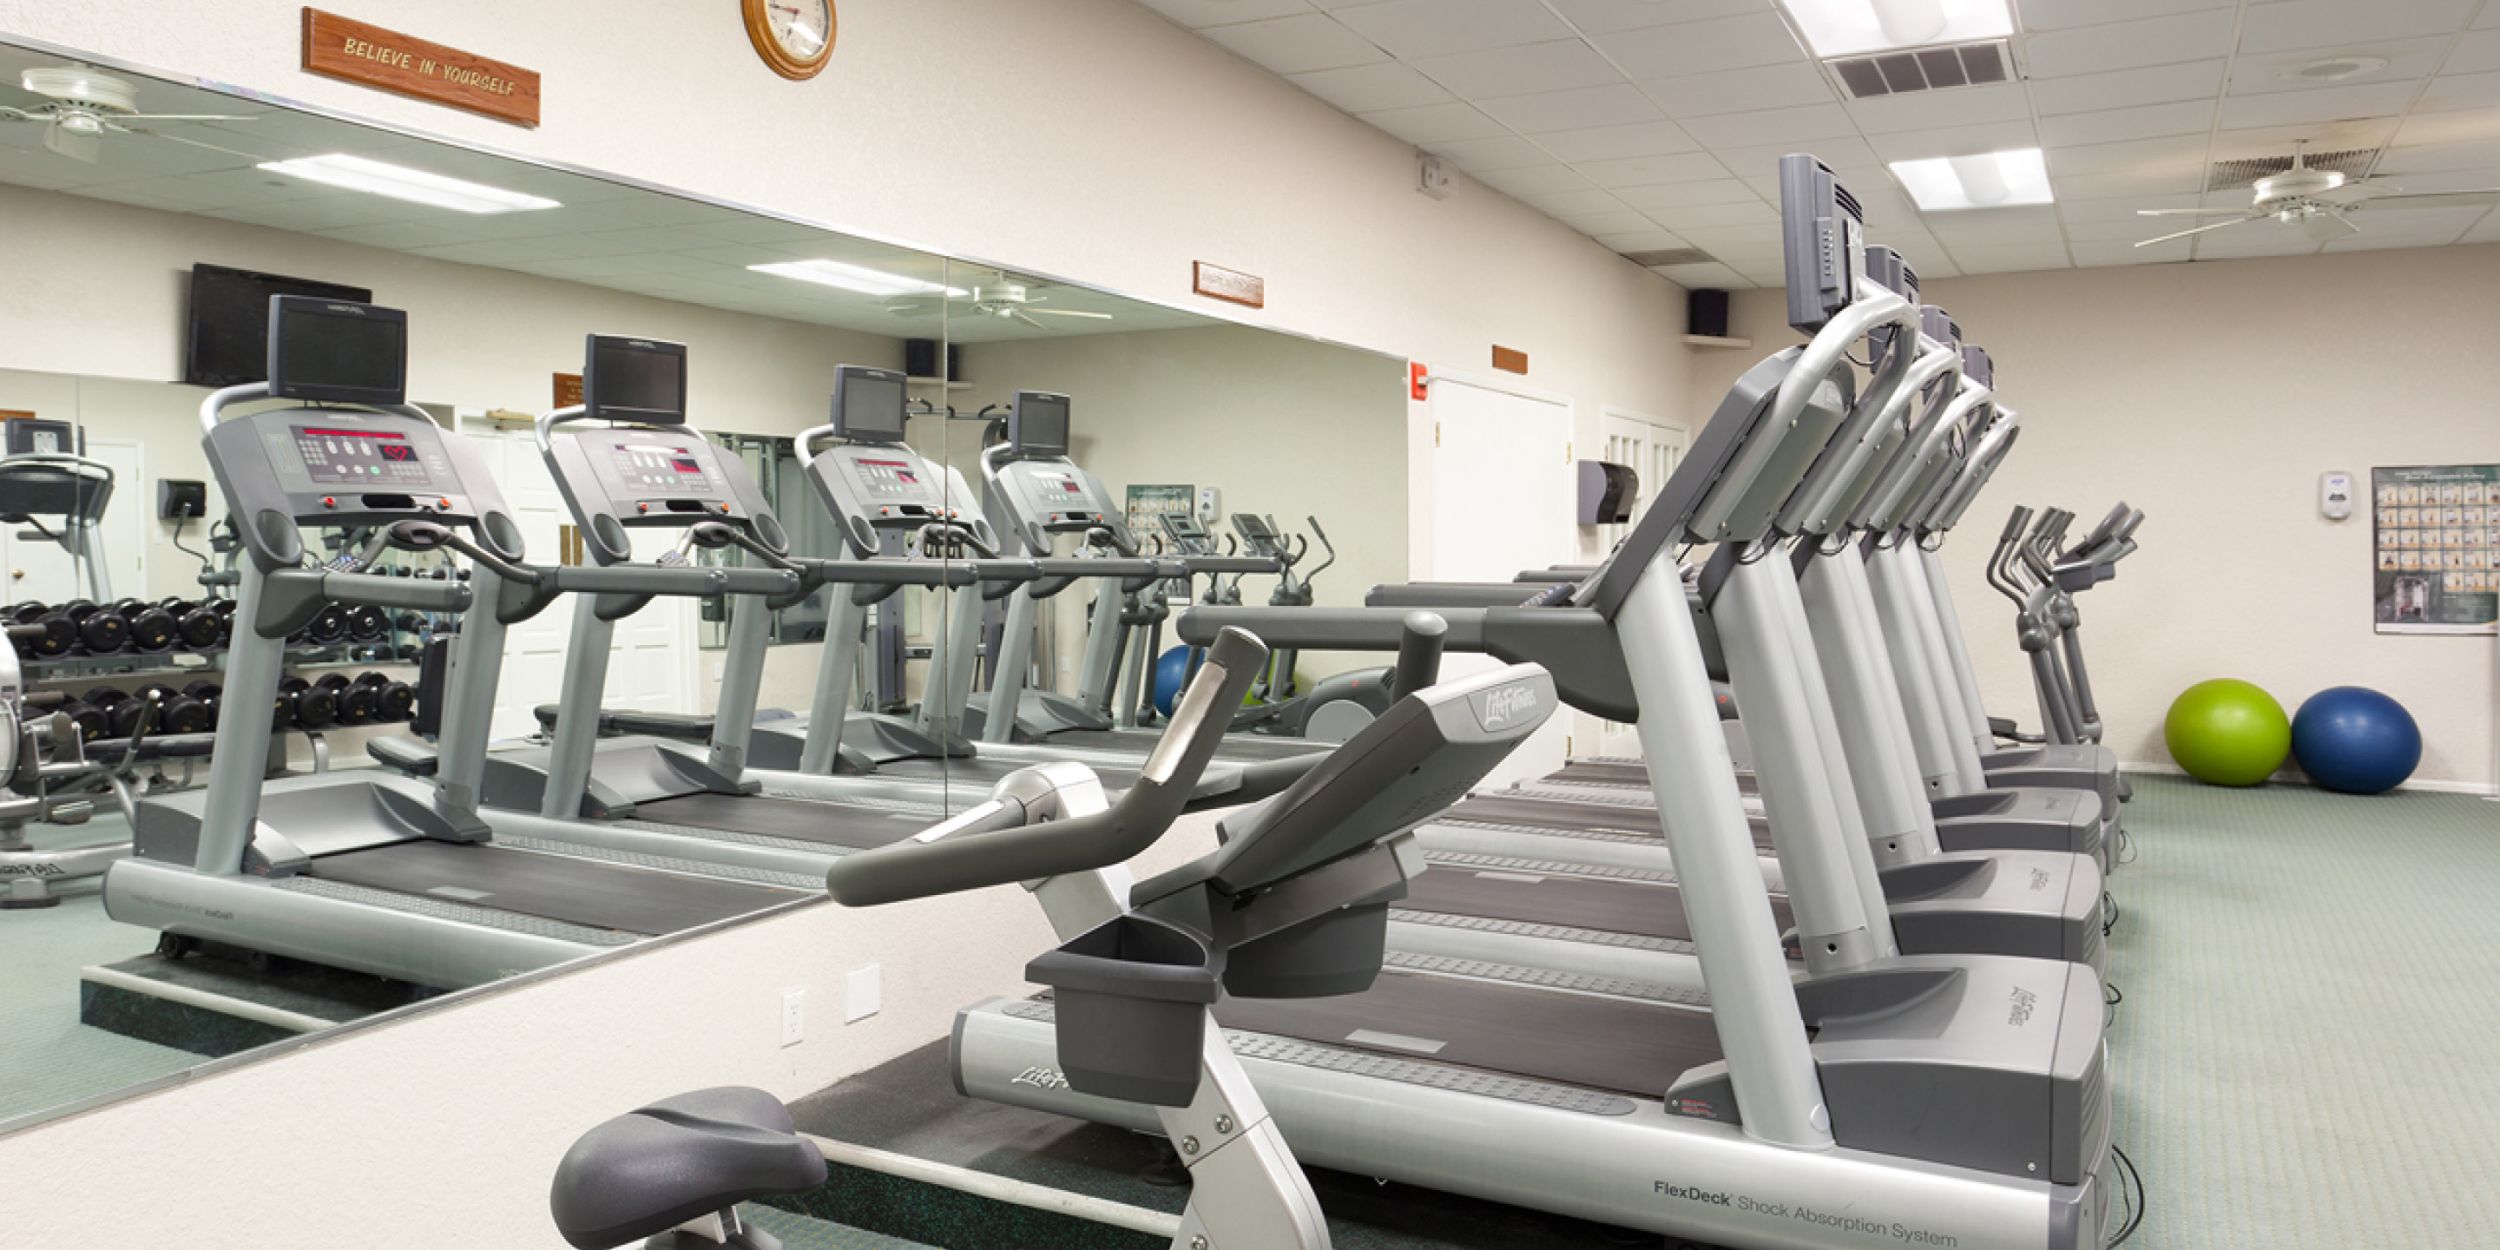 Exercise balls, gym weights and treadmills in the Island Grand Beach Resort's Spa & Fitness Center